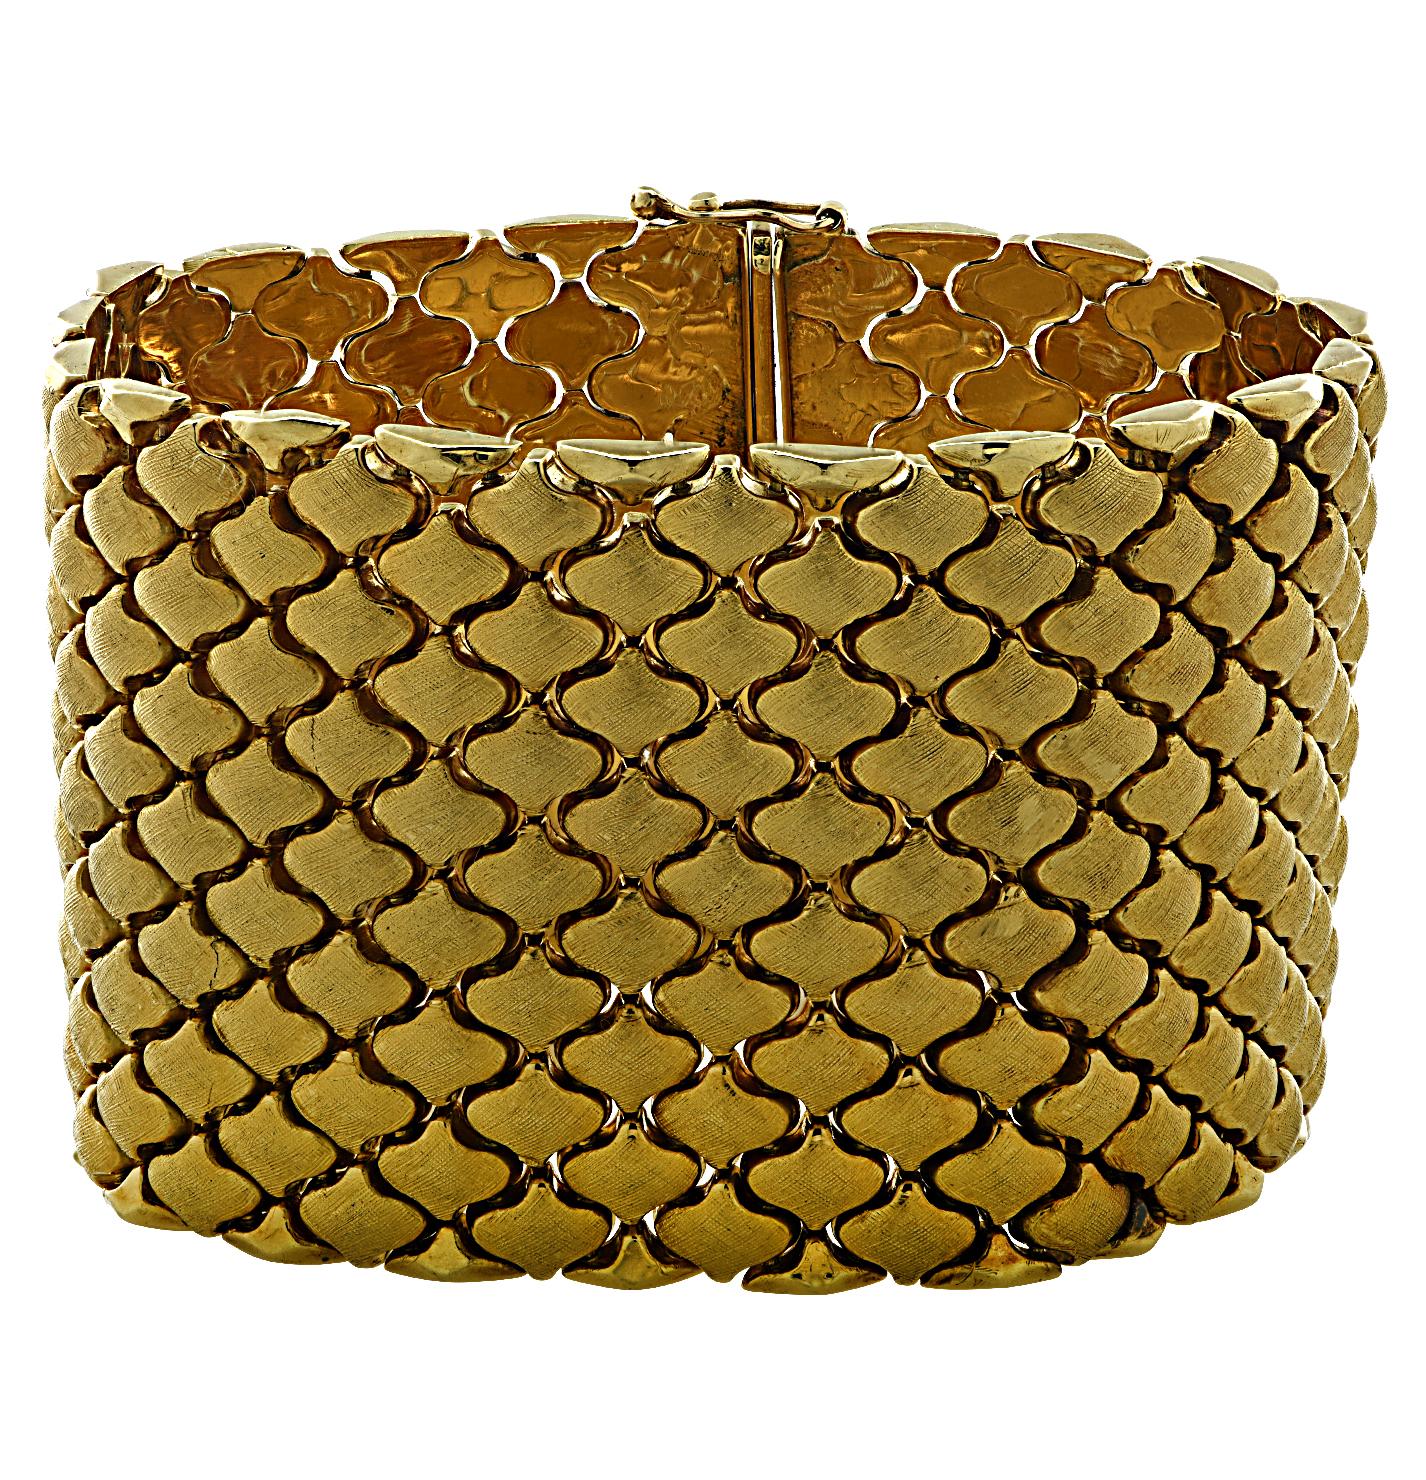 Stunning bracelet crafted in 18 karat yellow gold. Florentine finished links interlock to create a striking design. This gorgeous bracelet measures 7.5 inches in length and 1.8 inches in Width. It weighs 108.5 grams and closes with a hidden box